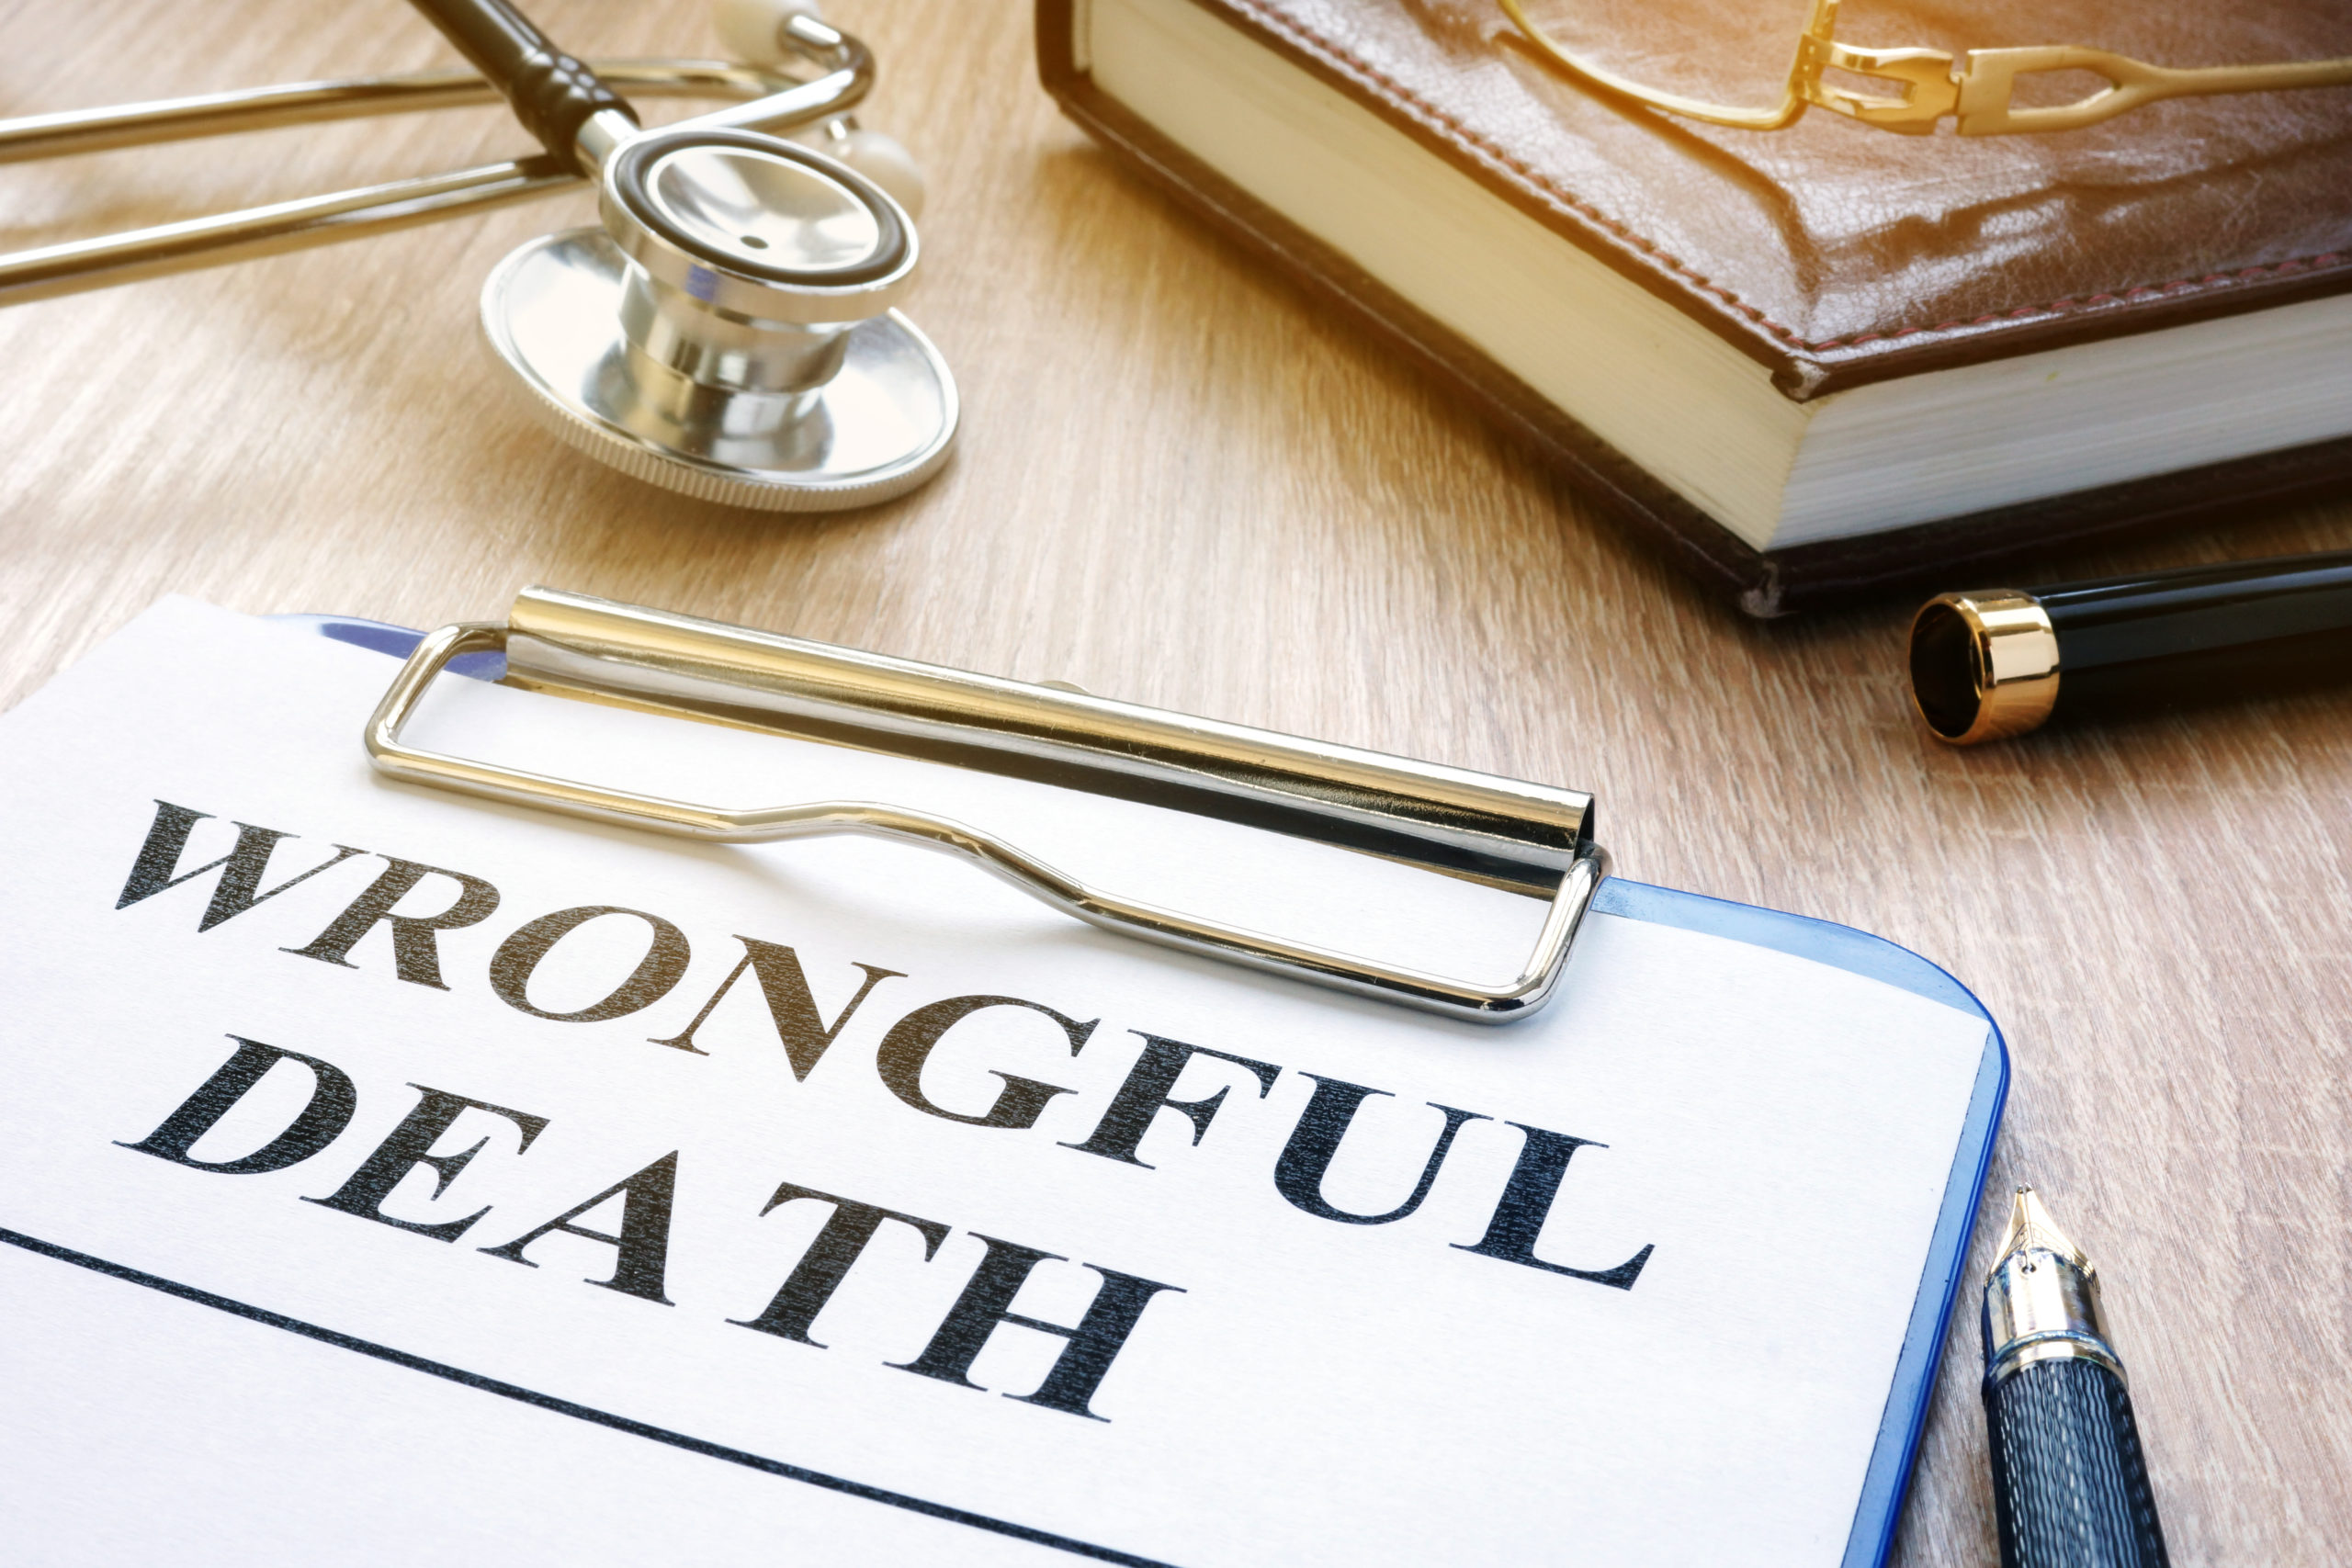 Florida wrongful death legal case in Florida